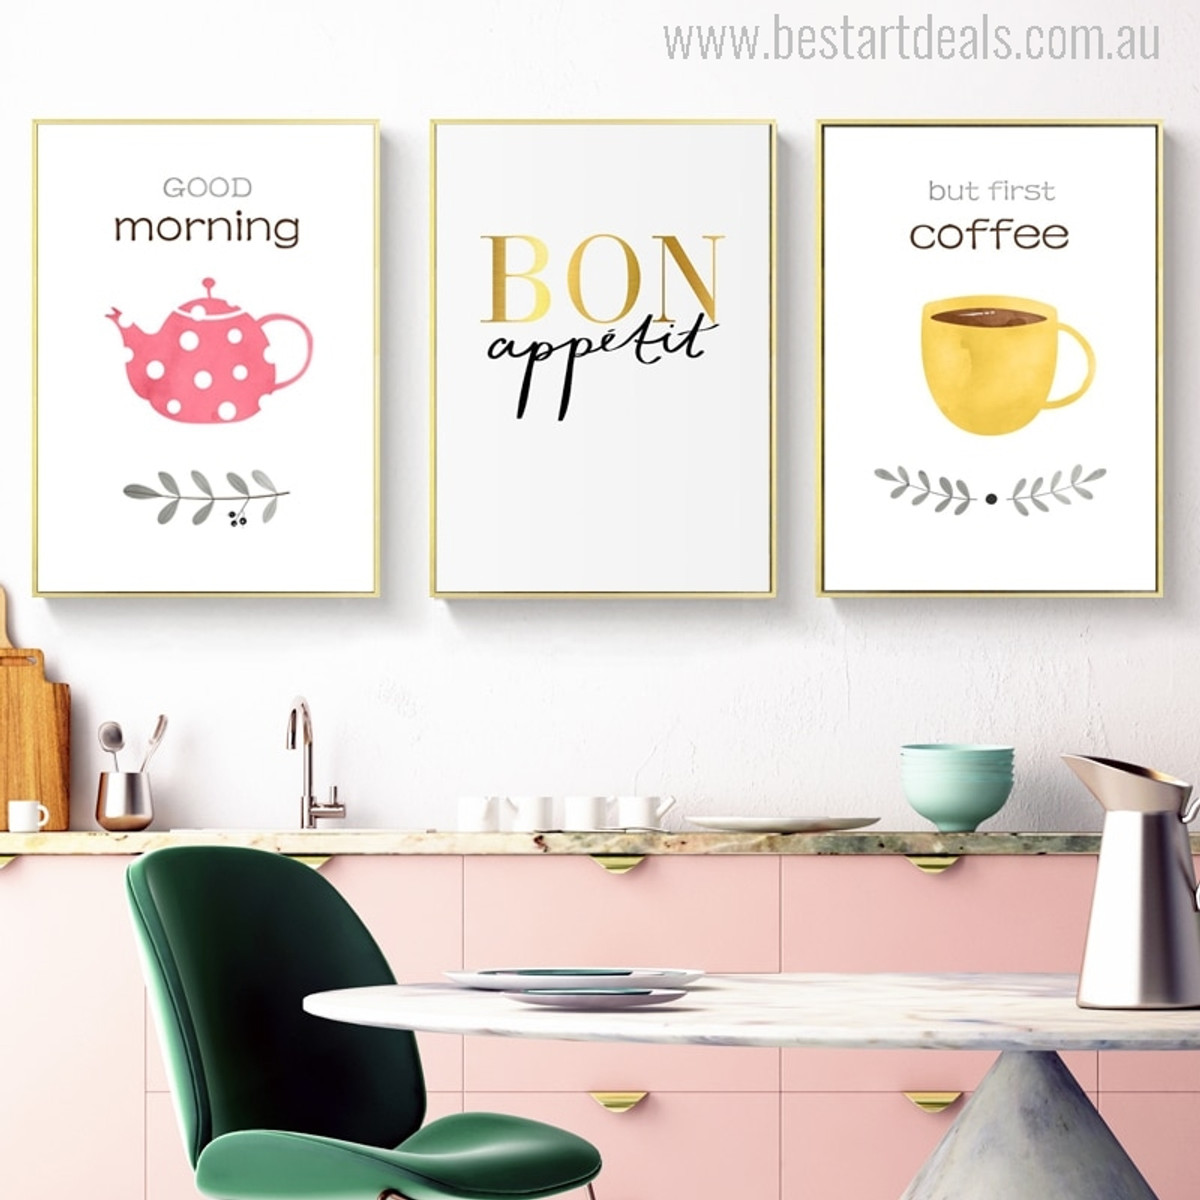 Good Morning Bon Appetit But First Coffee Typography Based Artwork Print